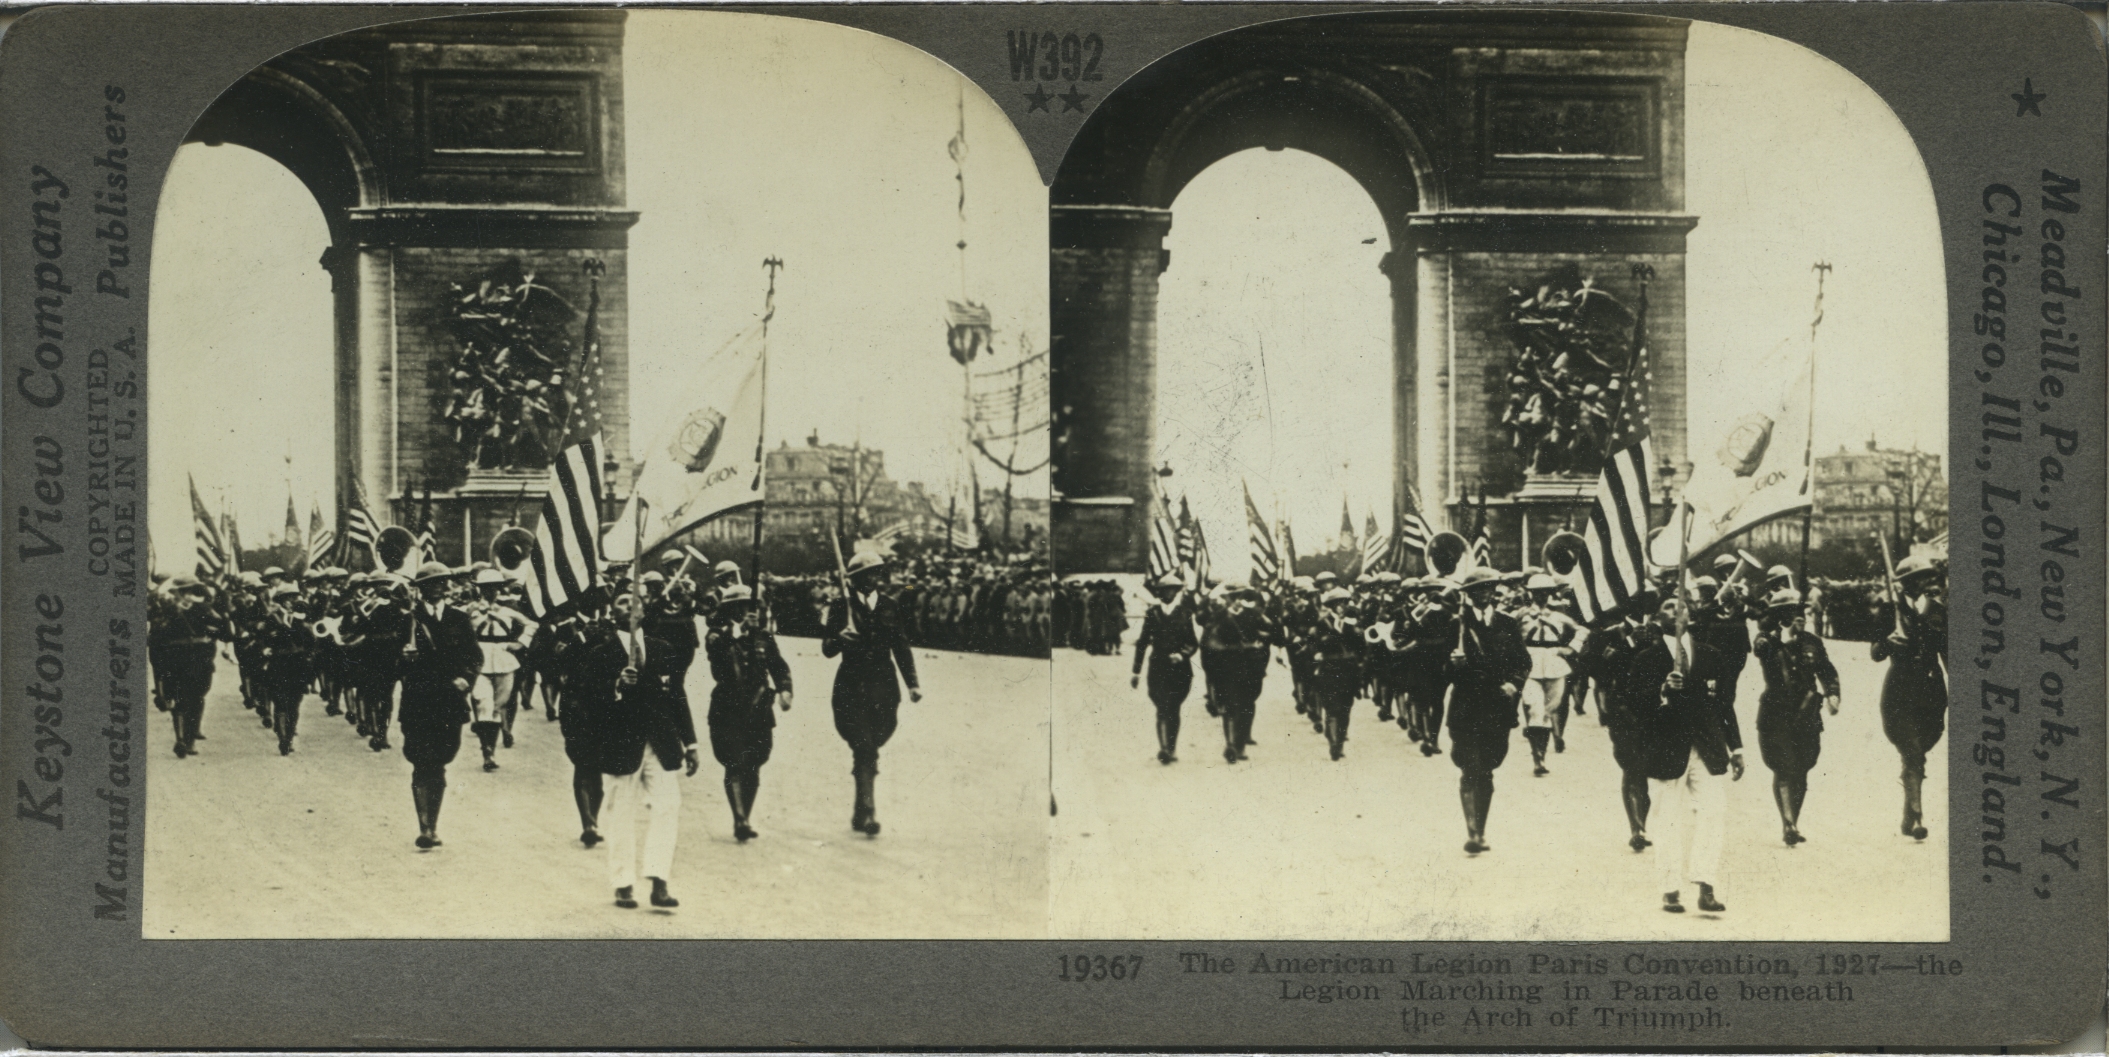 The American Legion Paris Convention, 1927--the Legion Marching in Parade Beneath the Arch of Triumph